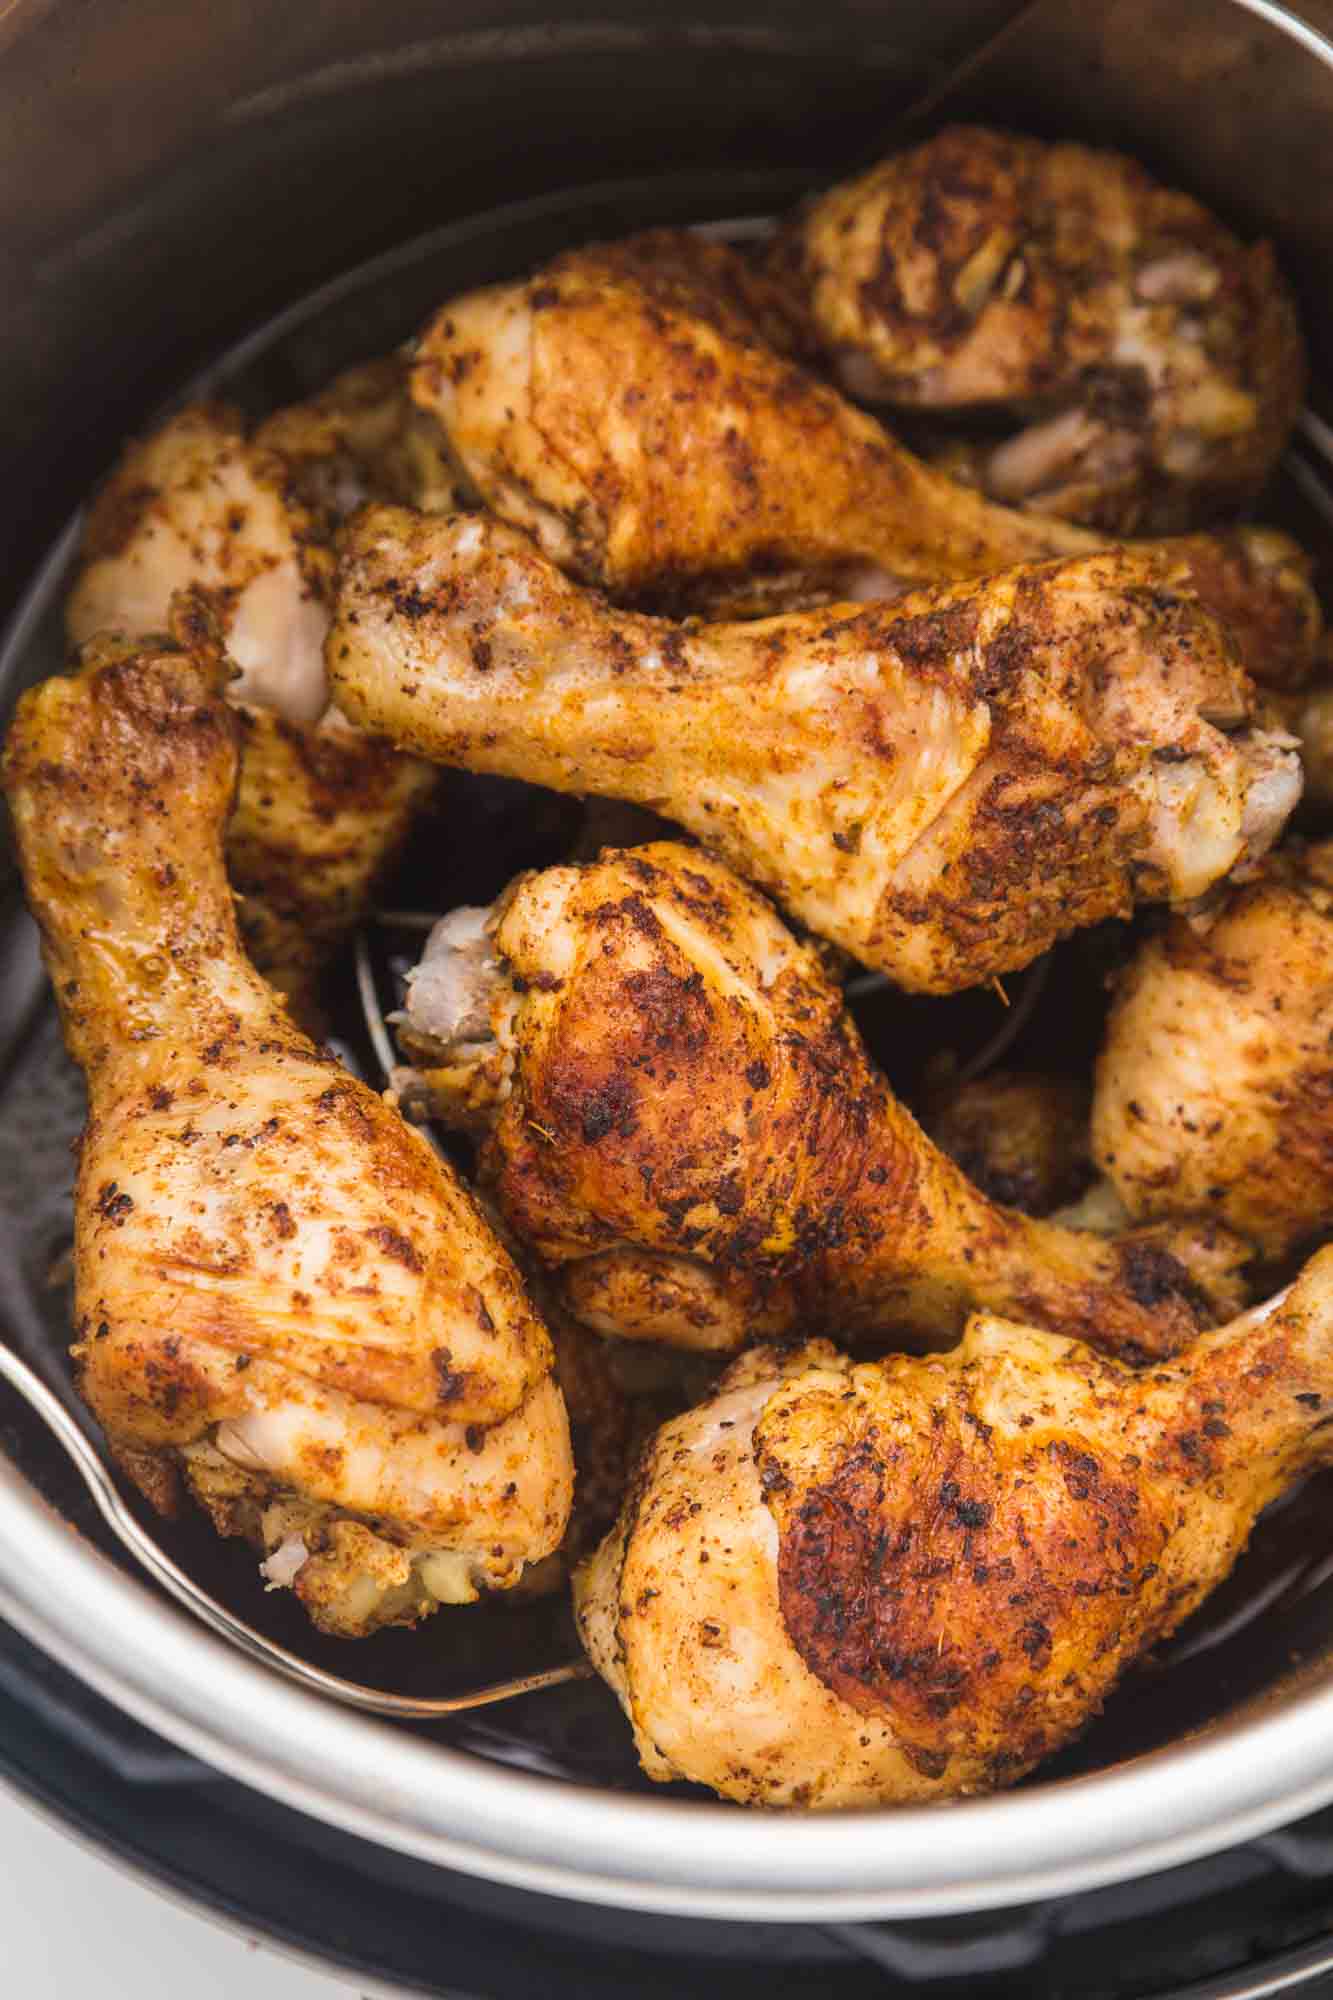 Seasoned and cooked drumsticks in the Instant Pot